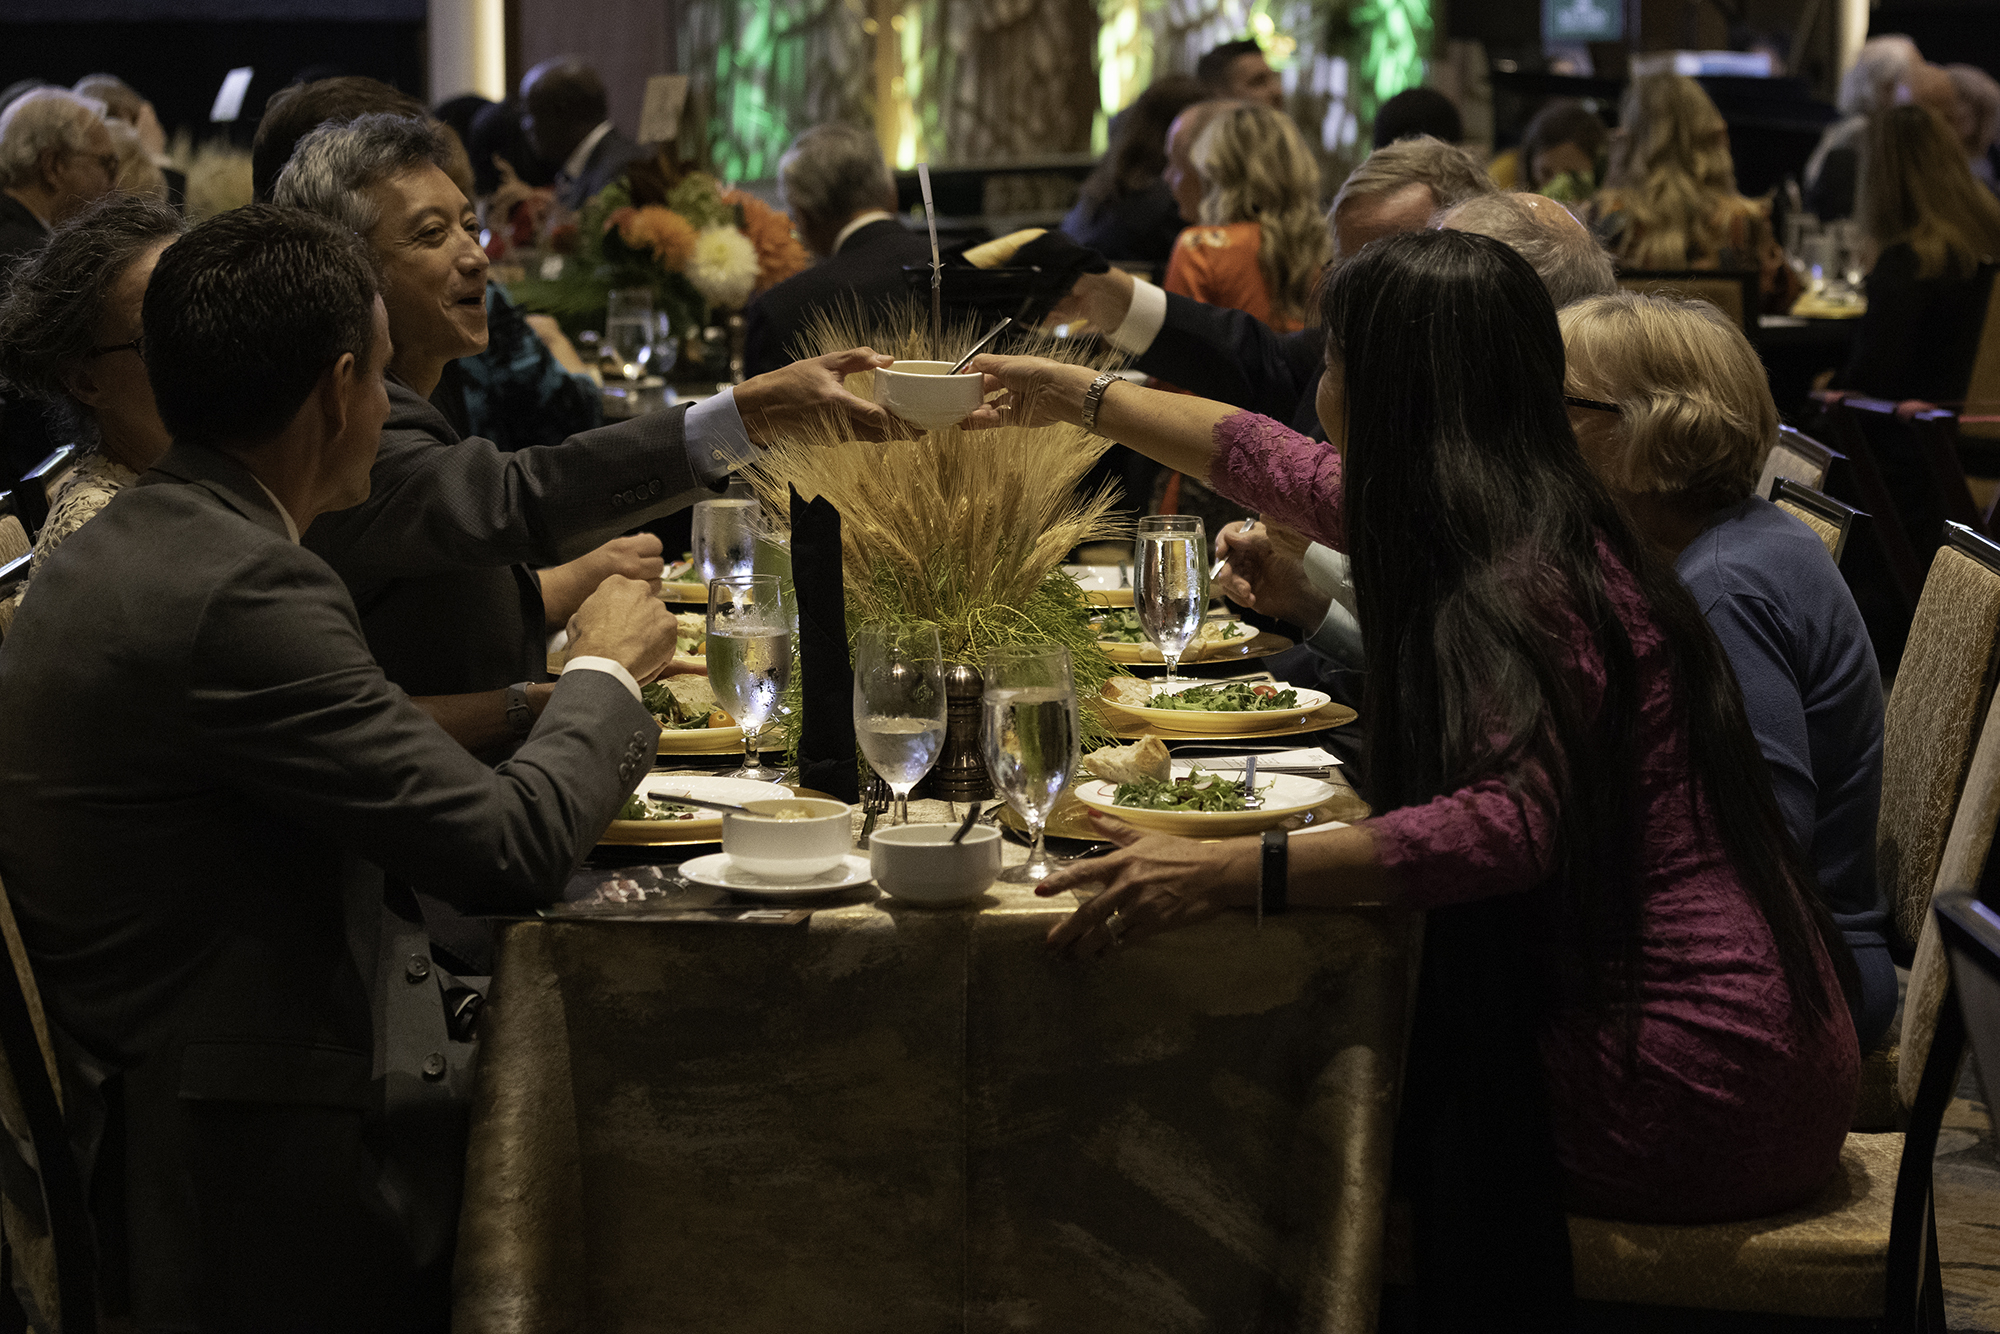 Guest enjoy conversation during A Taste of Southern dinner